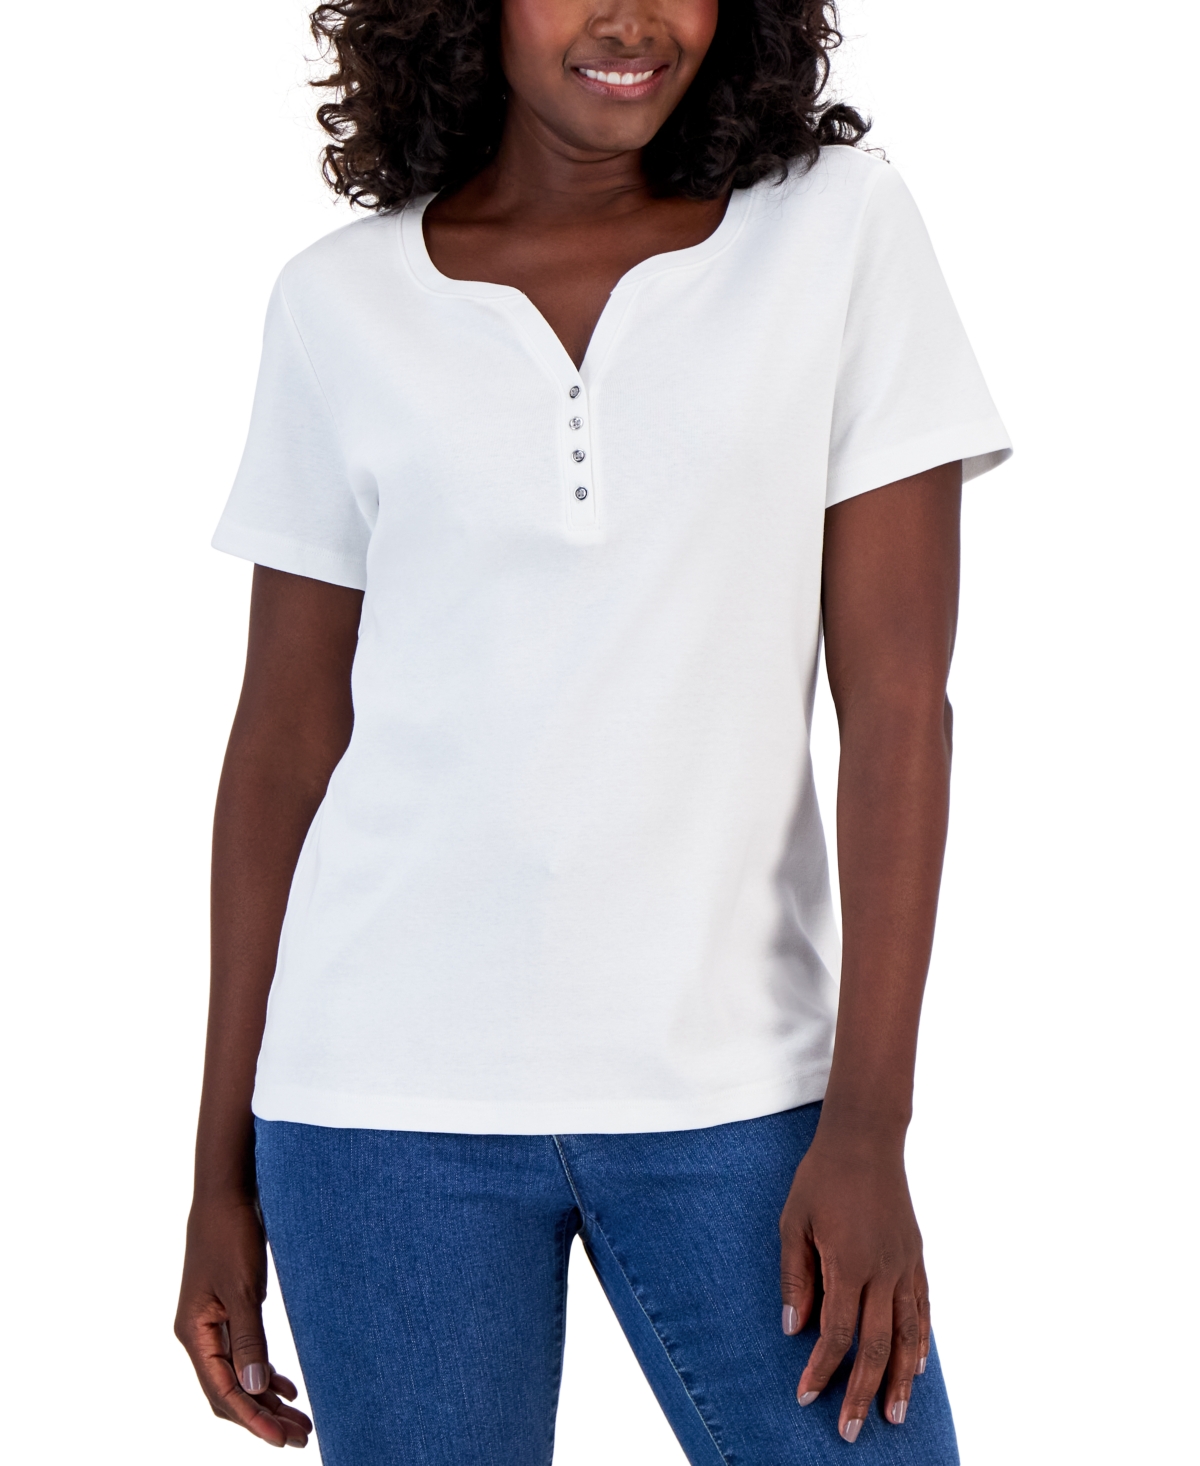 Petite Cotton Henley Top, Created for Macy's - Bright White